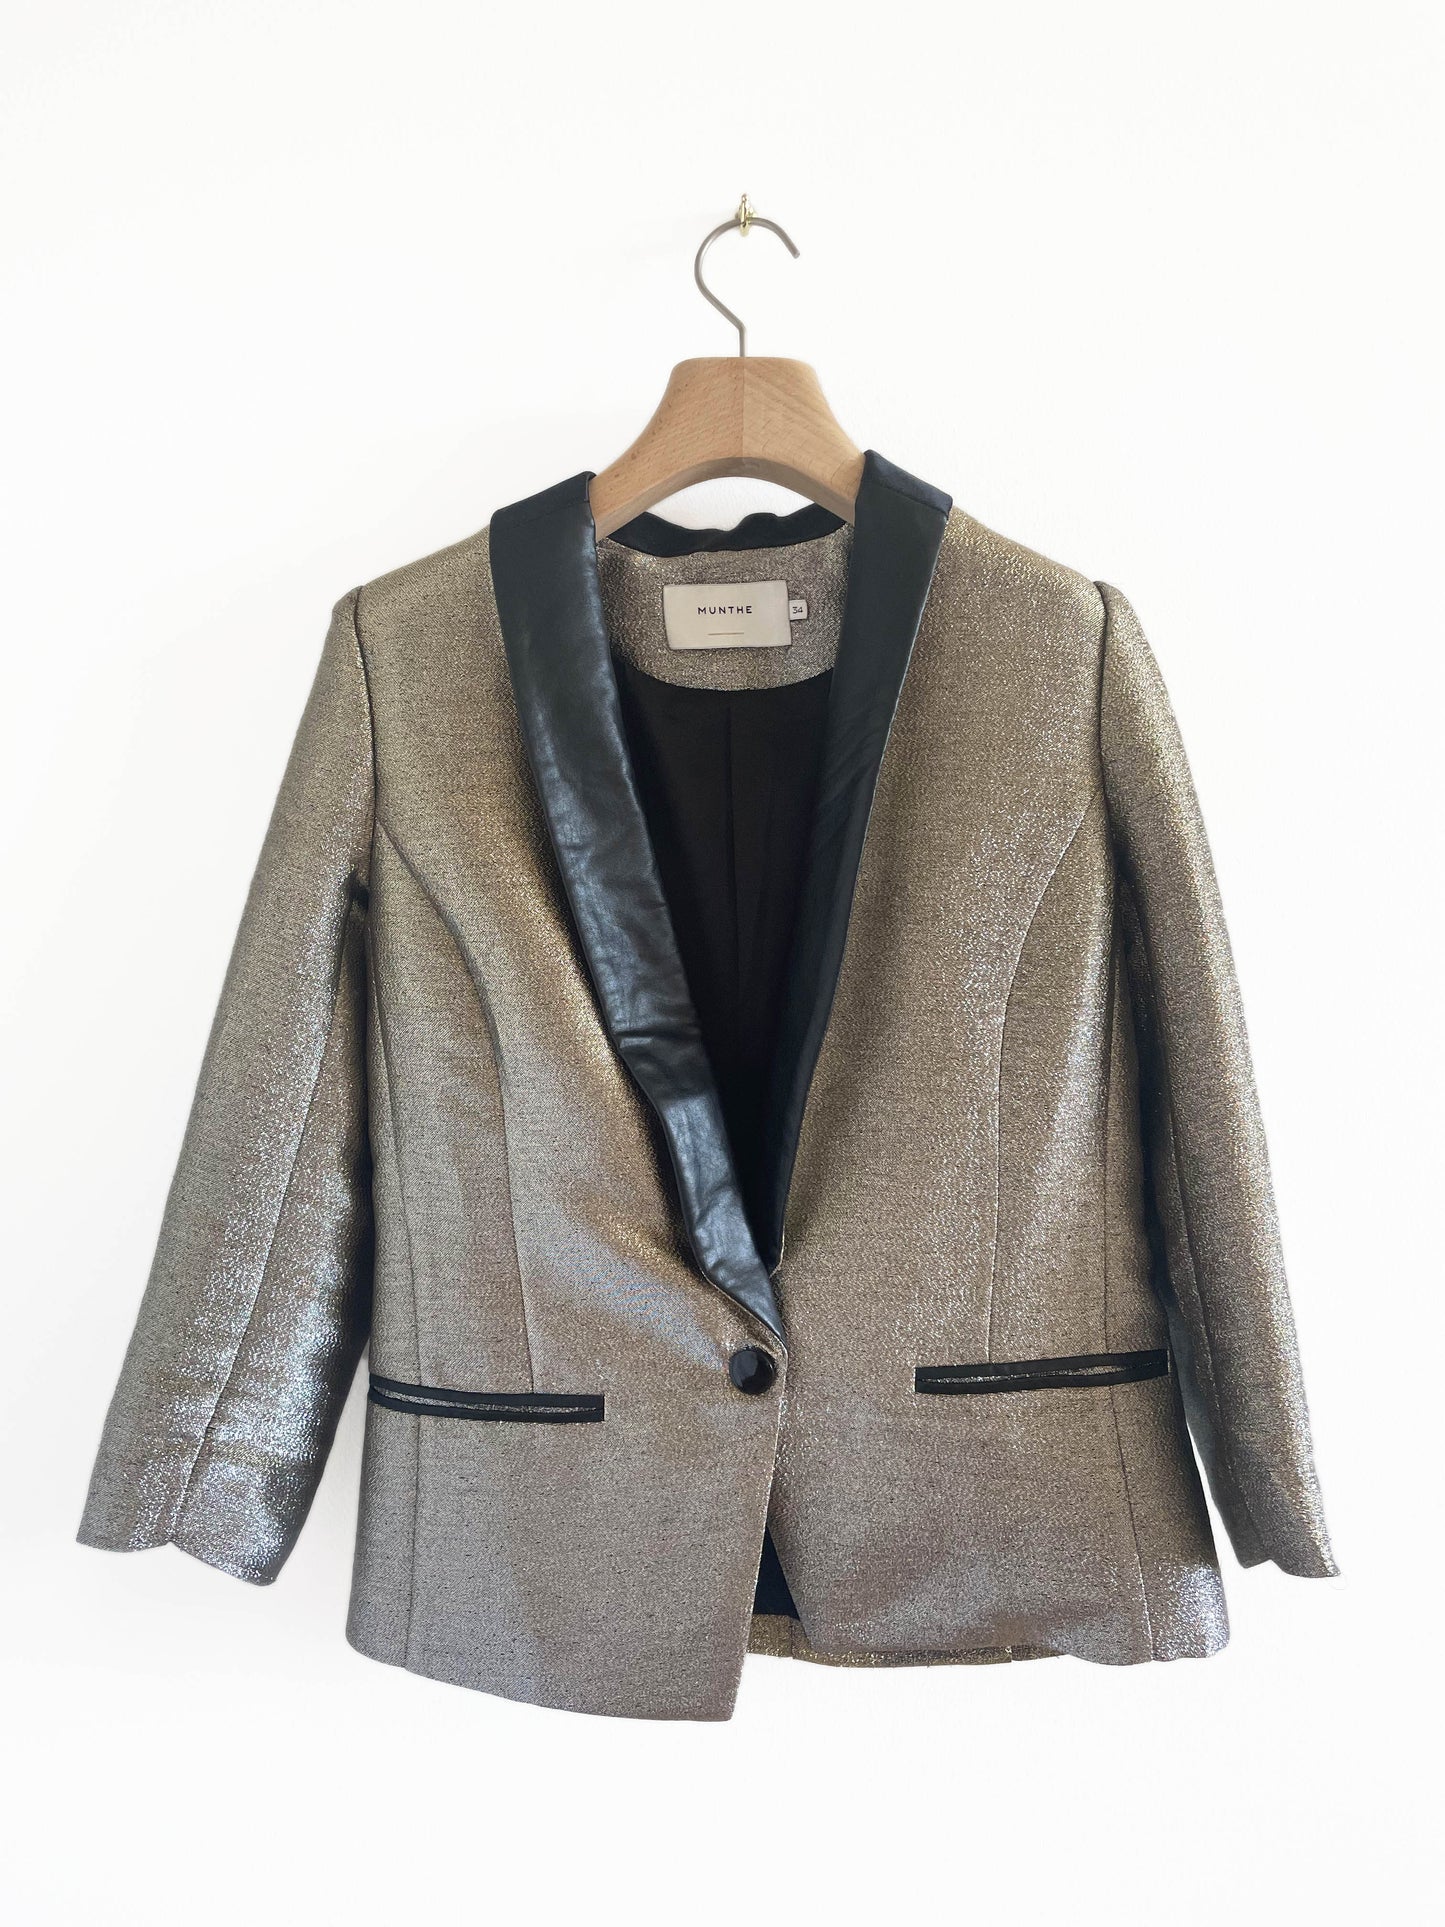 Gold Blazer with Leather Details, Size XS